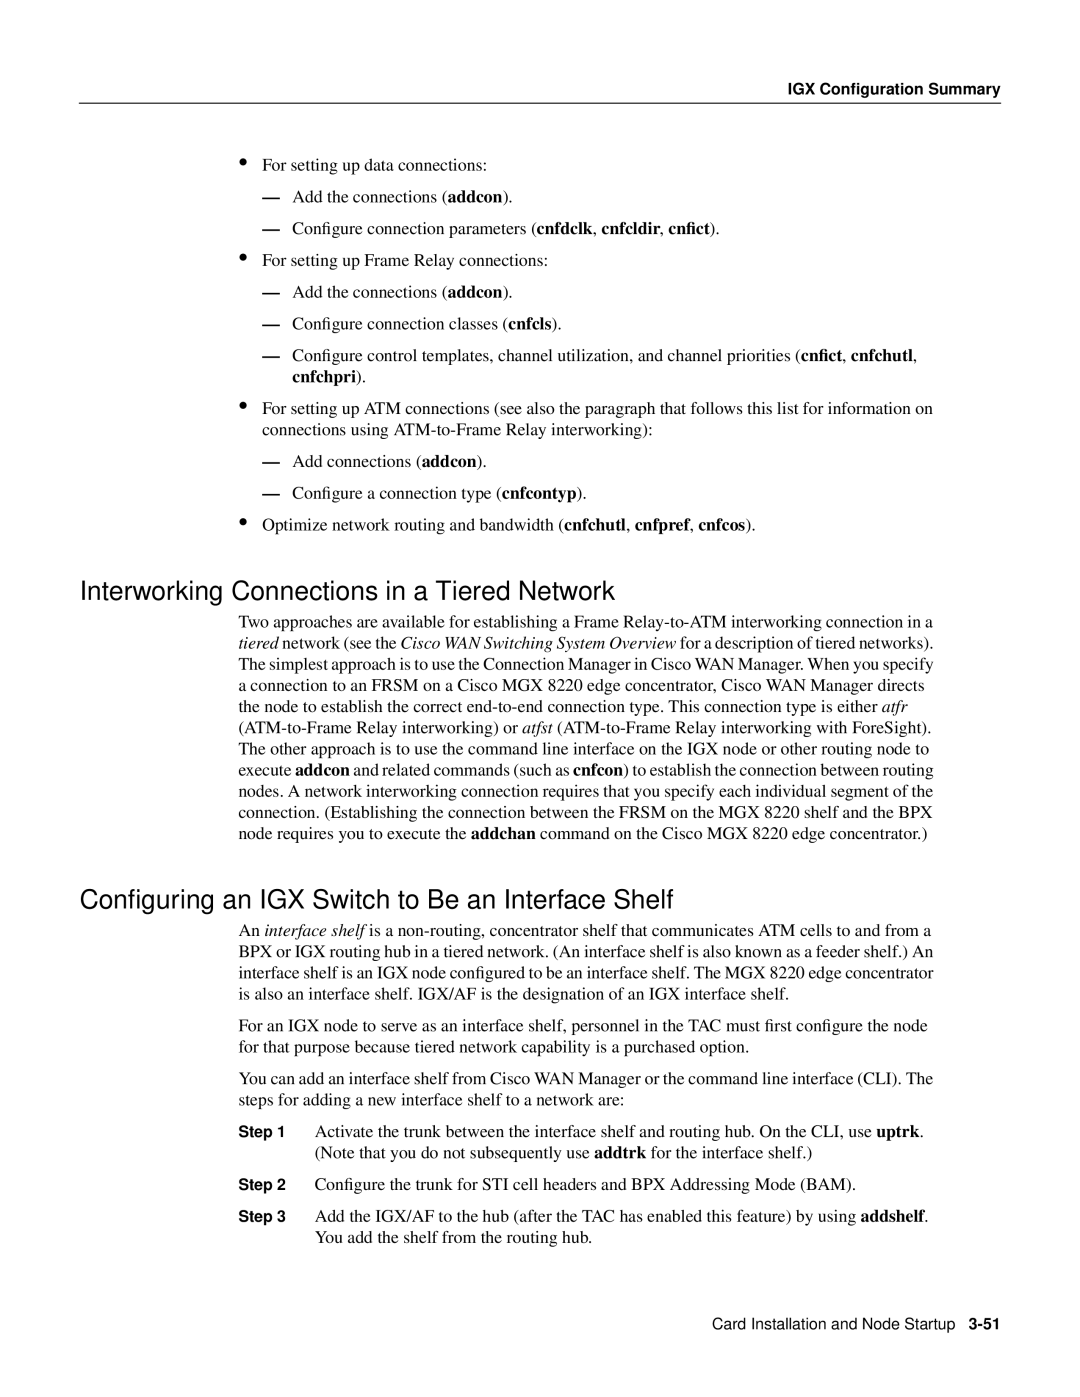 Cisco Systems IGX 8400 Series manual Interworking Connections in a Tiered Network 